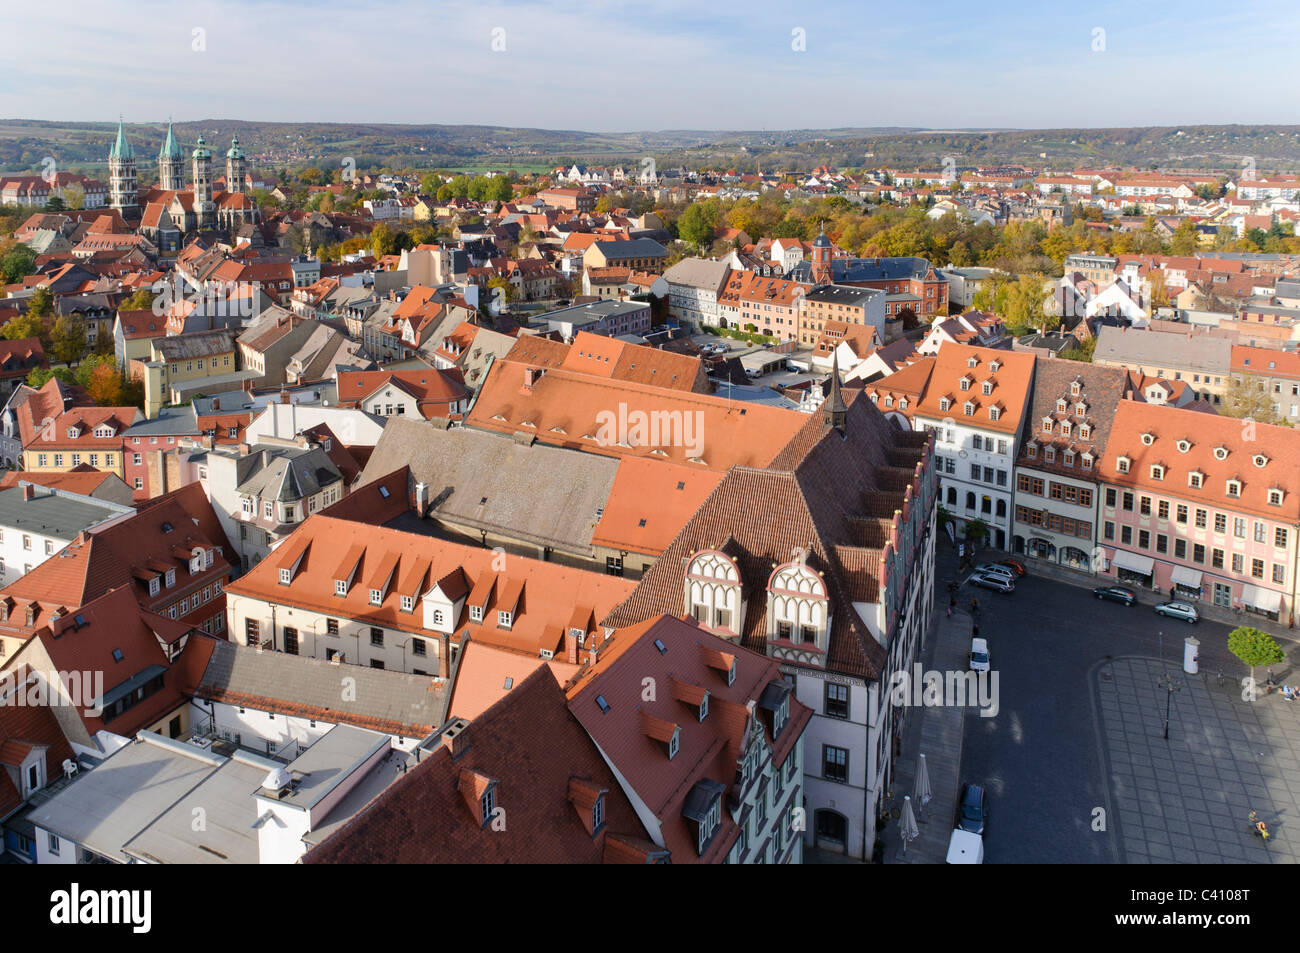 Architecture, outside, view, view, building, FRG, federal republic, roof, German, Germany, outdoors, outside, plan view, Europea Stock Photo